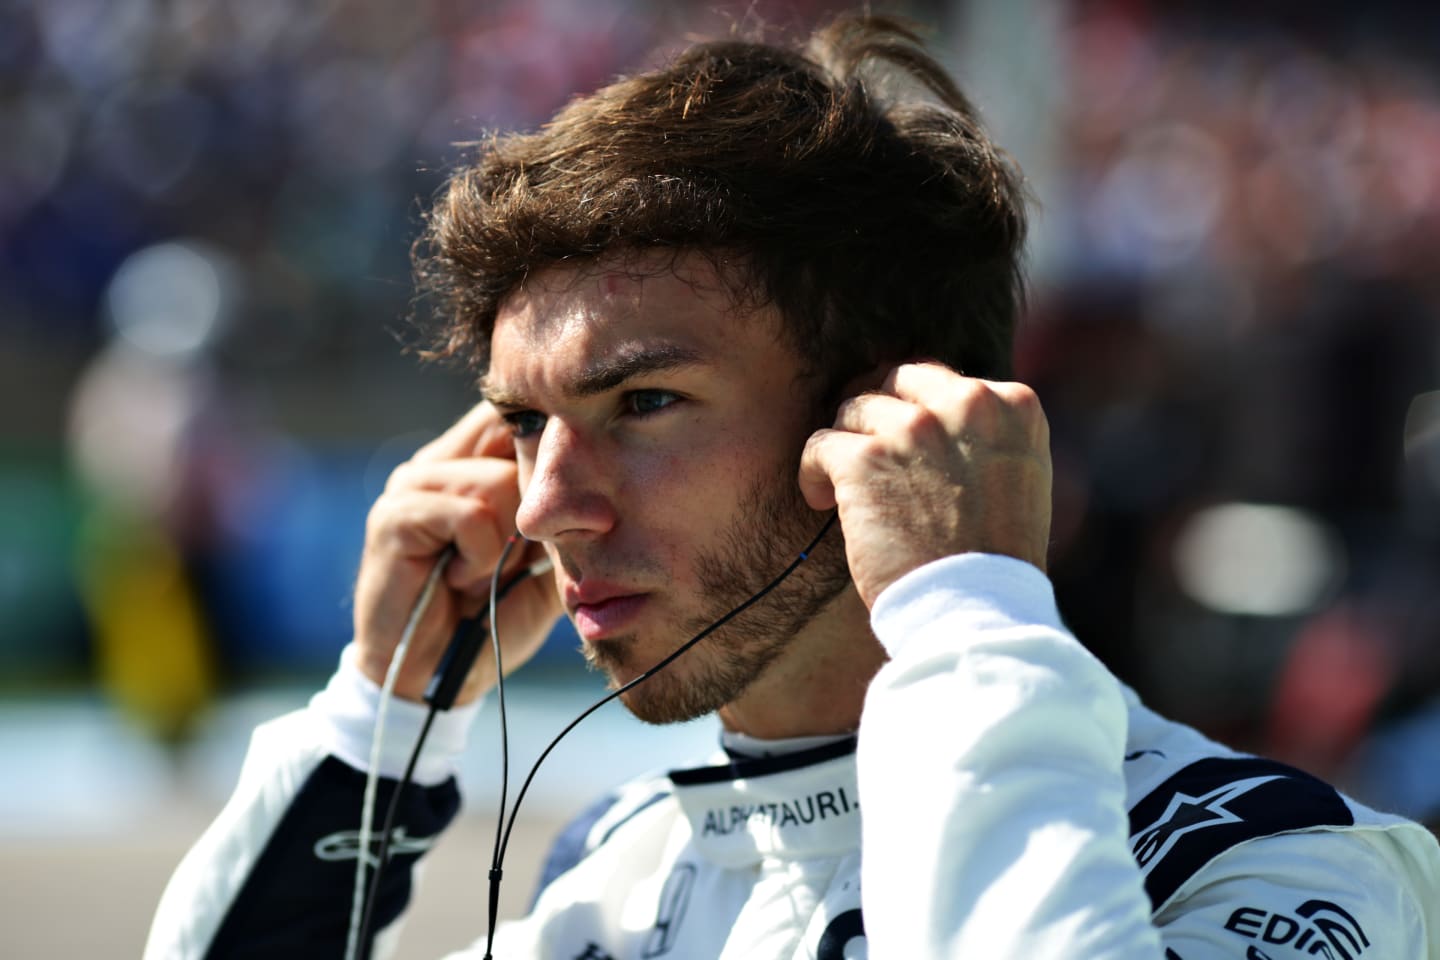 AUSTIN, TEXAS - OCTOBER 24: Pierre Gasly of France and Scuderia AlphaTauri prepares to drive on the